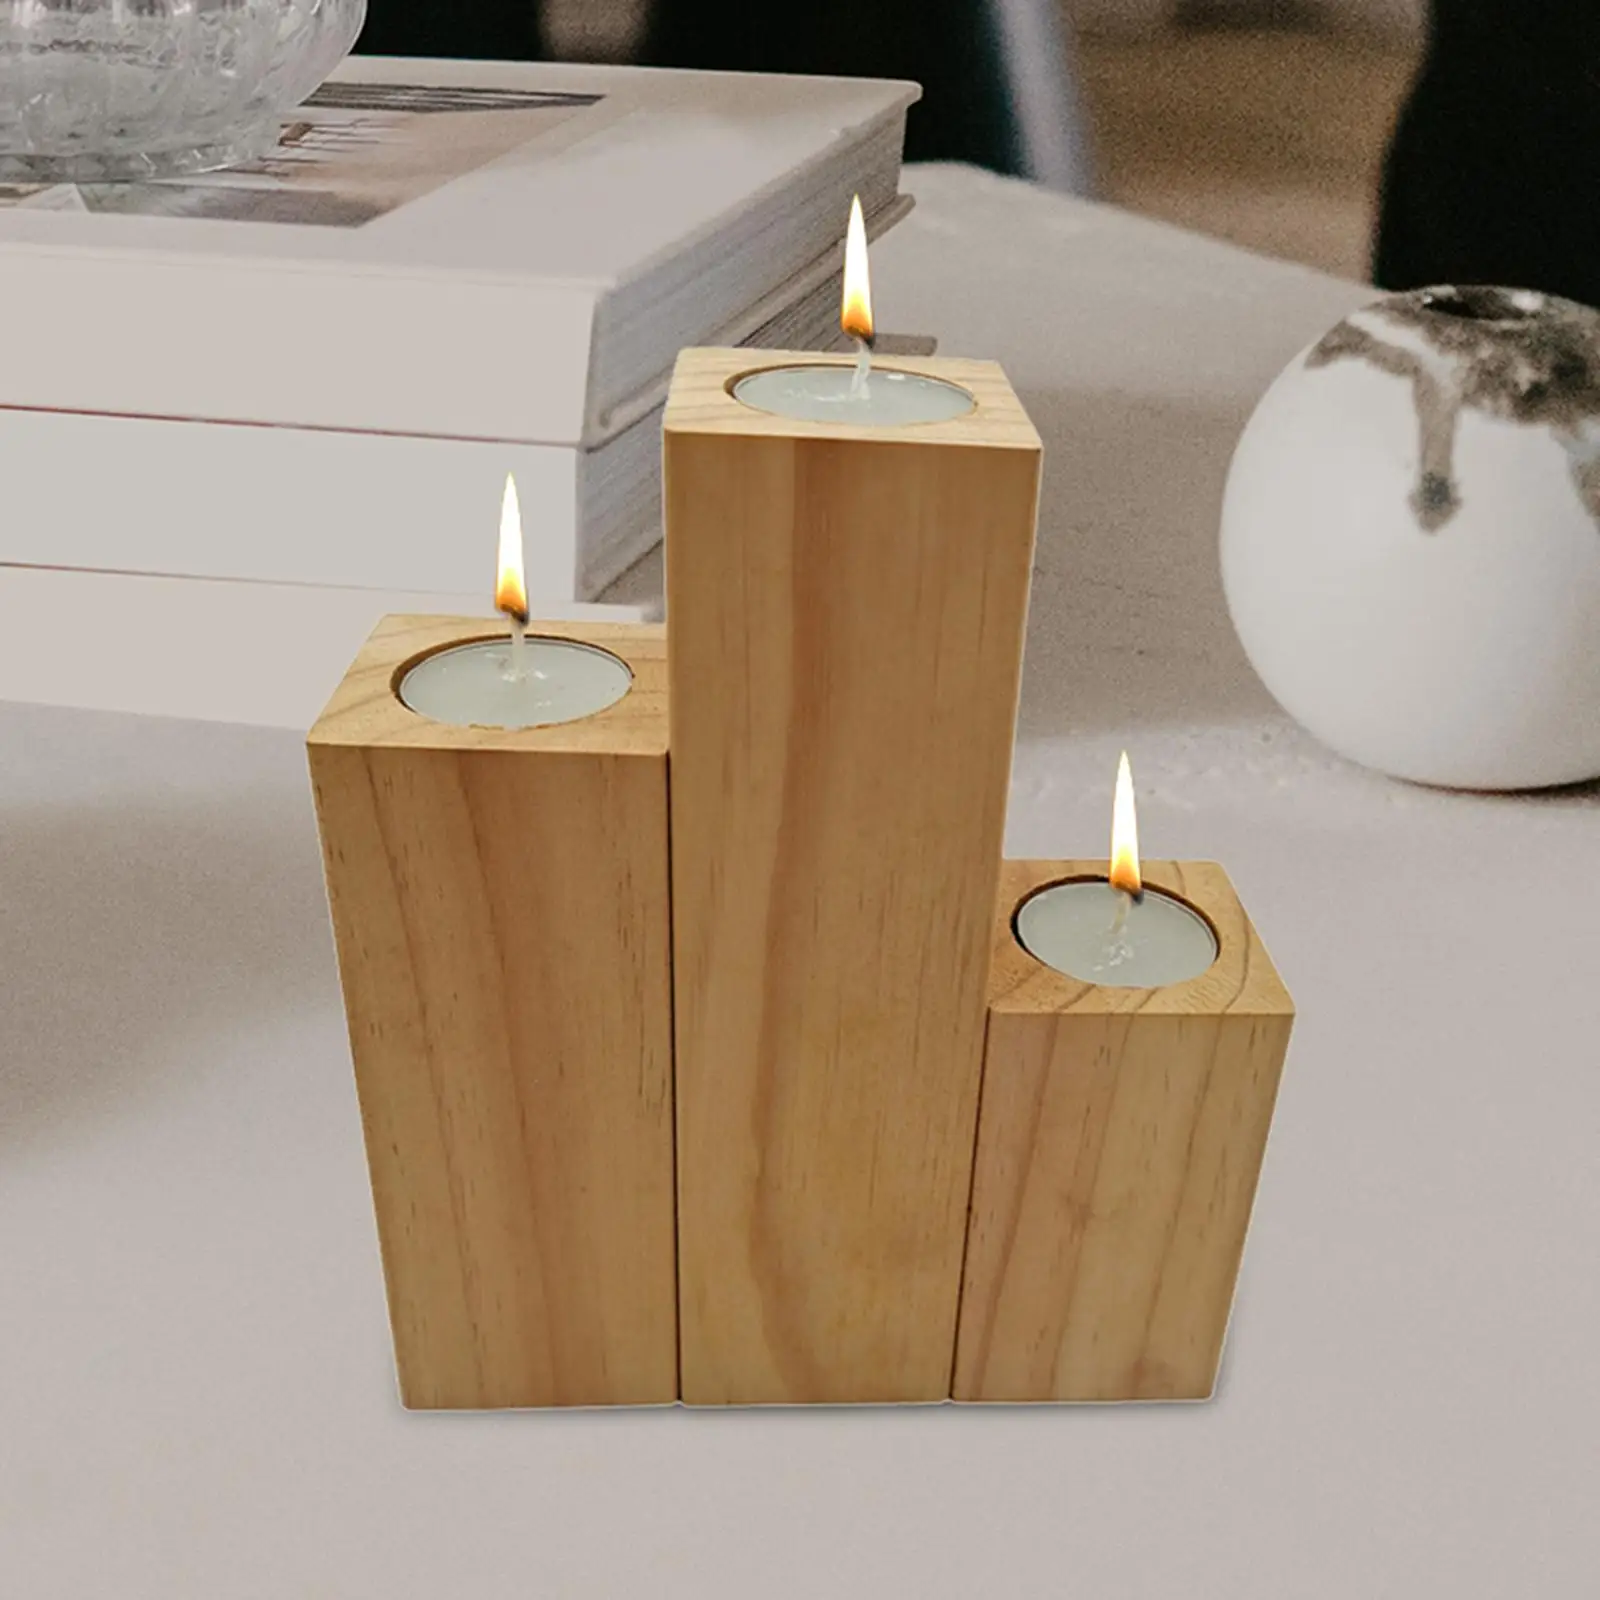 Wooden Candle Holders Sturdy Elegant Crafts Candle Base Retro Candlestick Practical for Farmhouse Holiday Bathroom Tabletop Home